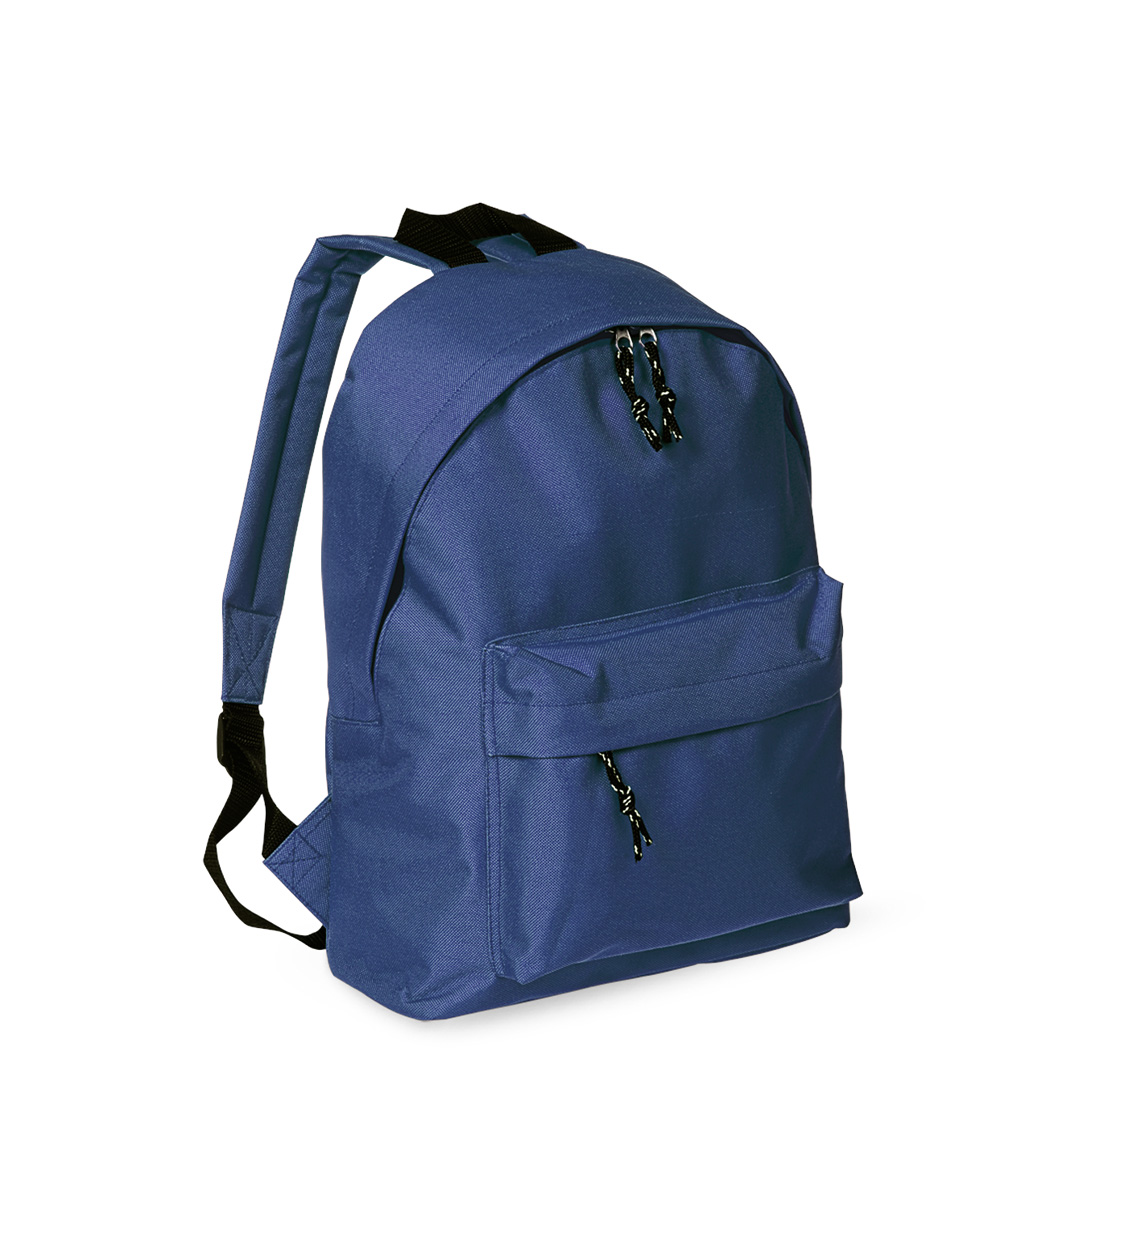 Discovery backpack - blue